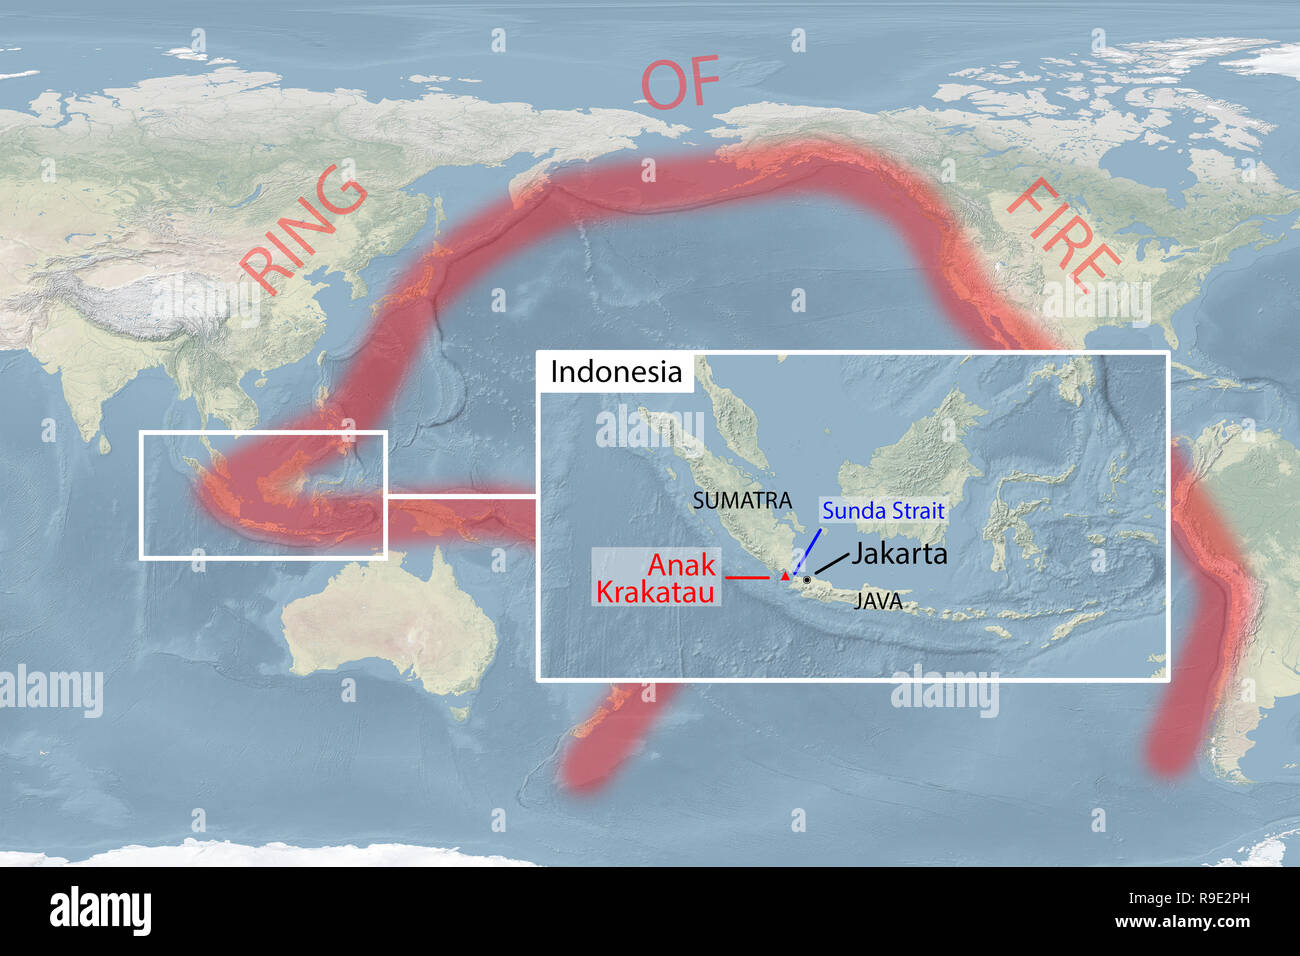 World. 23rd Dec, 2018. World map shows Pacific 'Ring of Fire', Anak  Krakatau volcano and Sunda Strait in Indonesia (image for illustrative  purposes only). A tsunami hit coastal towns on Indonesia's islands